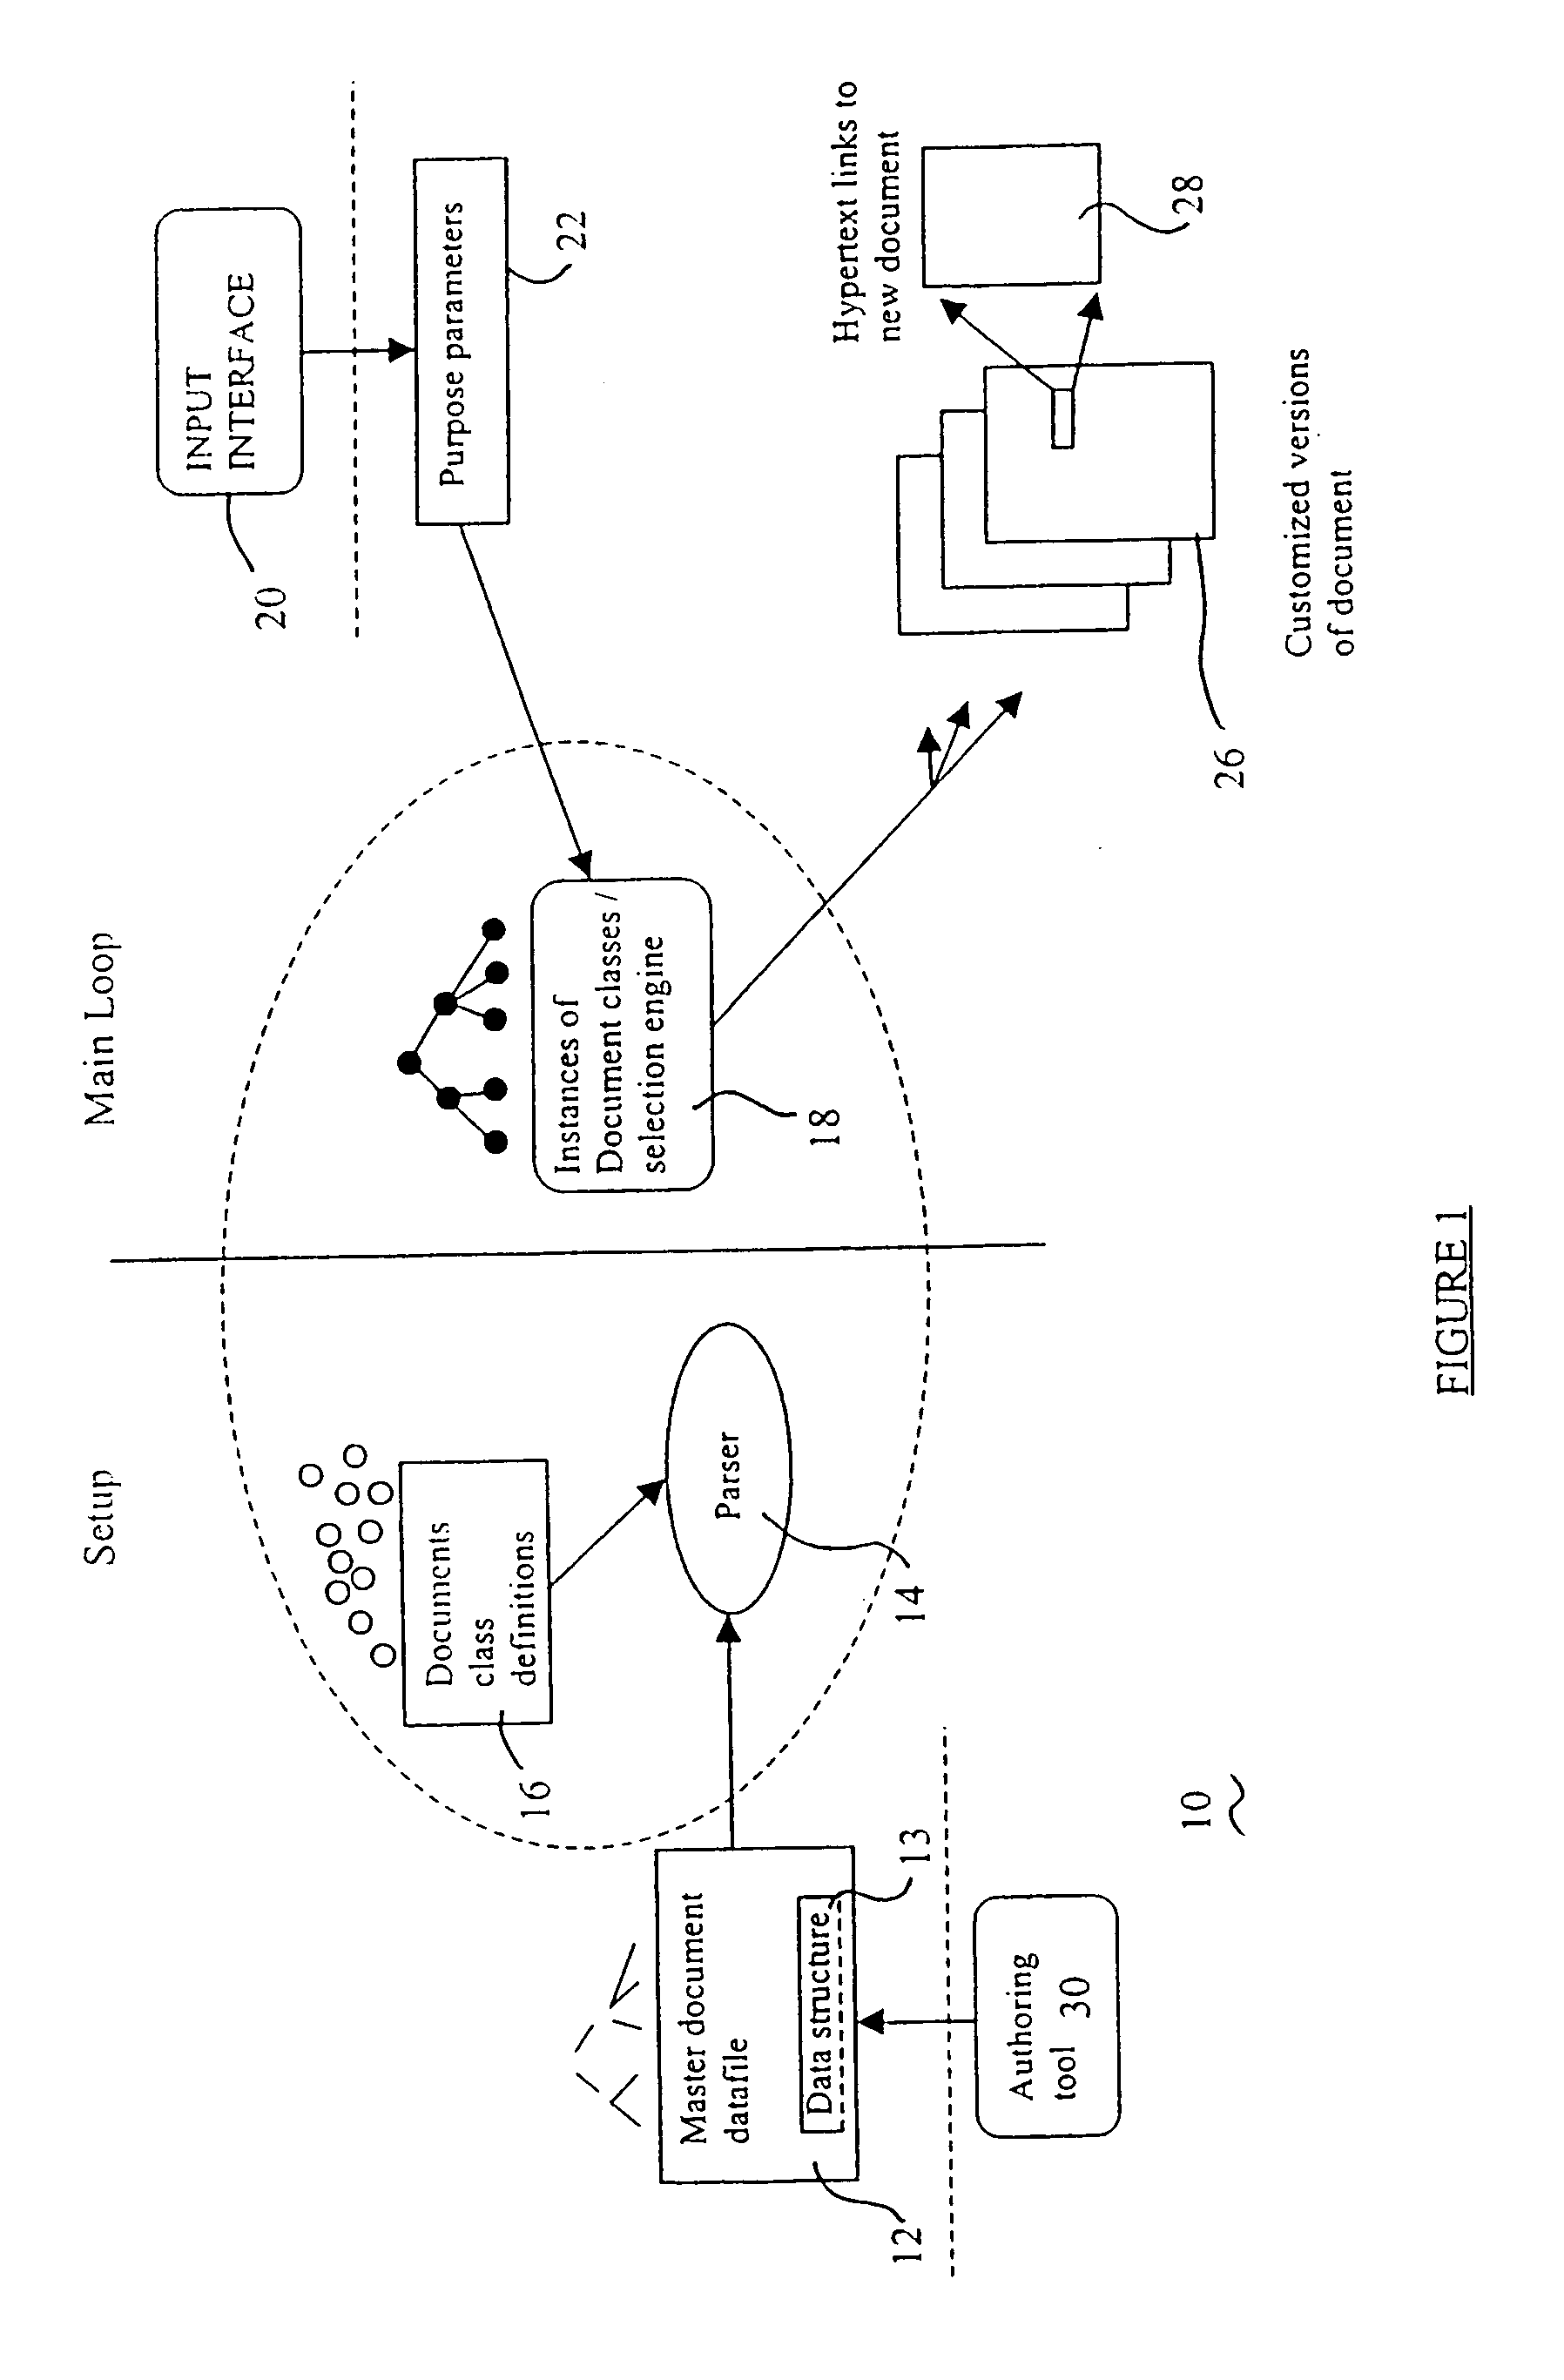 Method and apparatus for authoring of customizable multimedia documents